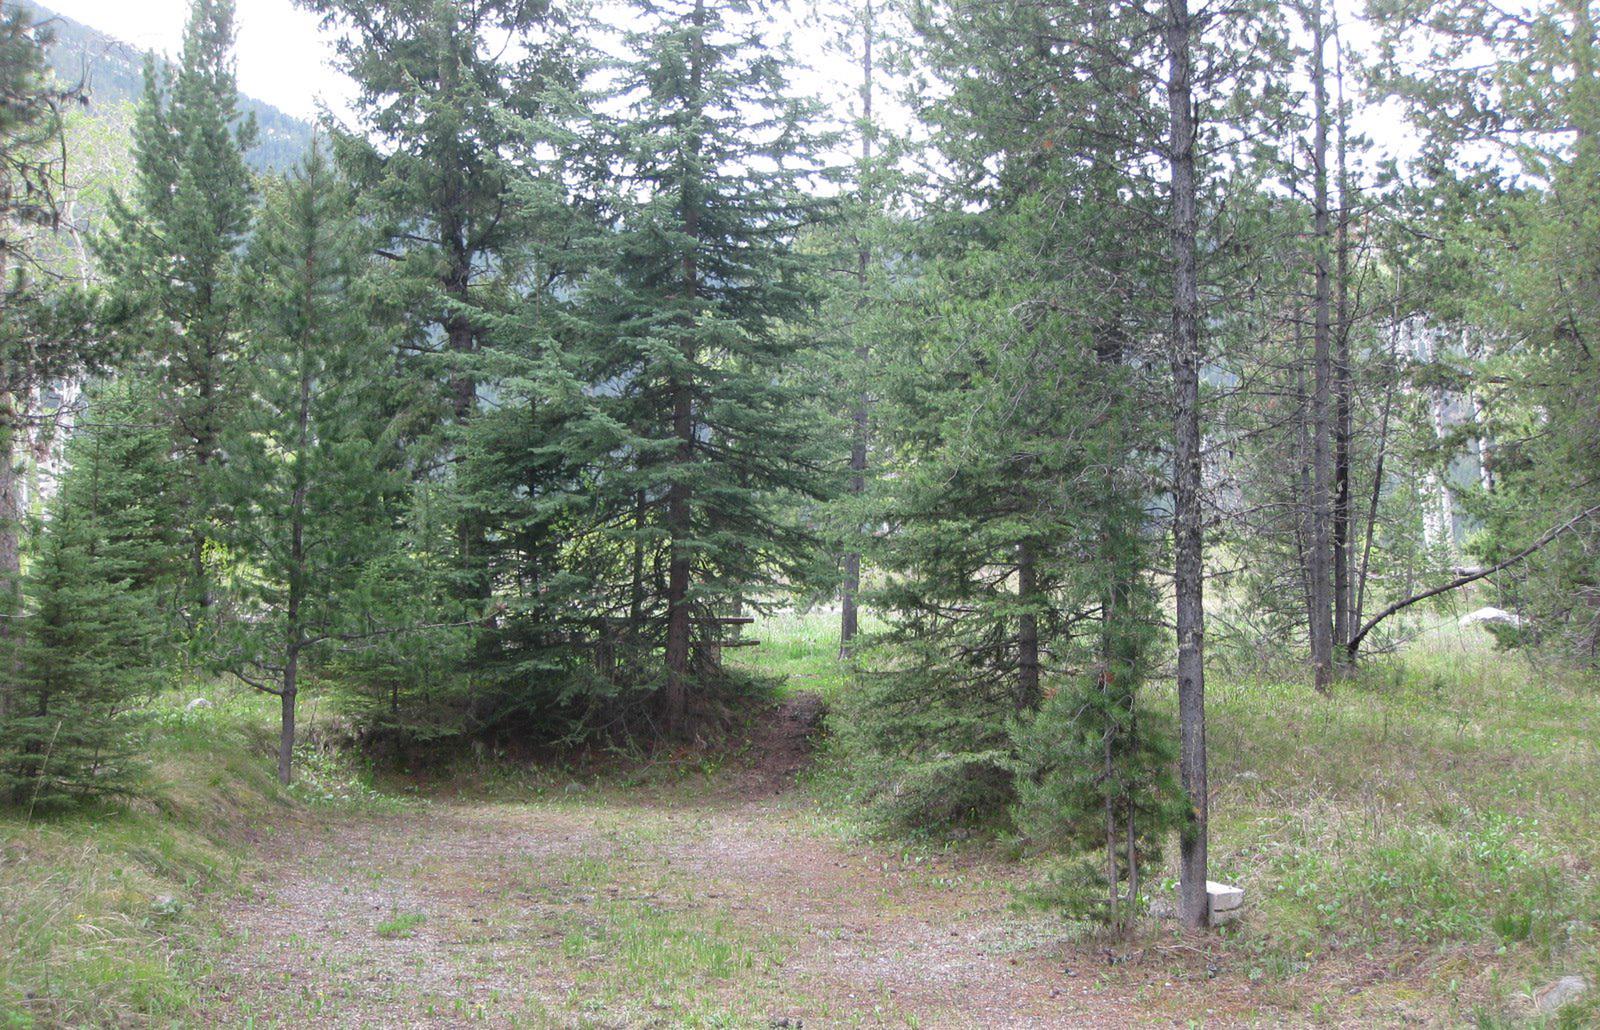 Site C2, campsite surrounded by pine trees, picnic table & fire ringSite C2